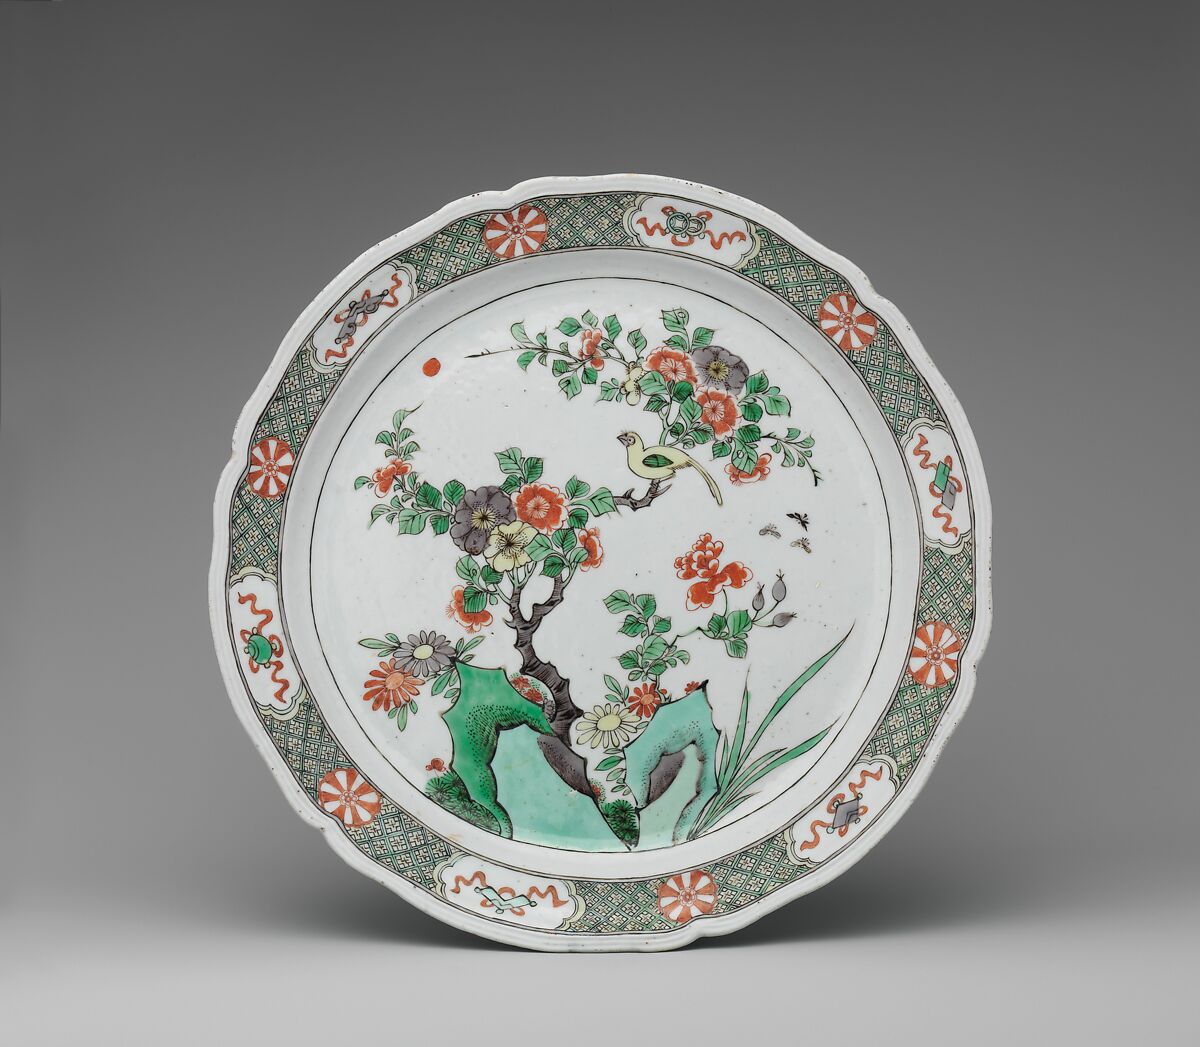 Dish with rocks, flowers, and birds, Hard-paste porcelain painted with colored enamels over transparent glaze (Jingdezhen ware), Chinese, for European, probably French, market 